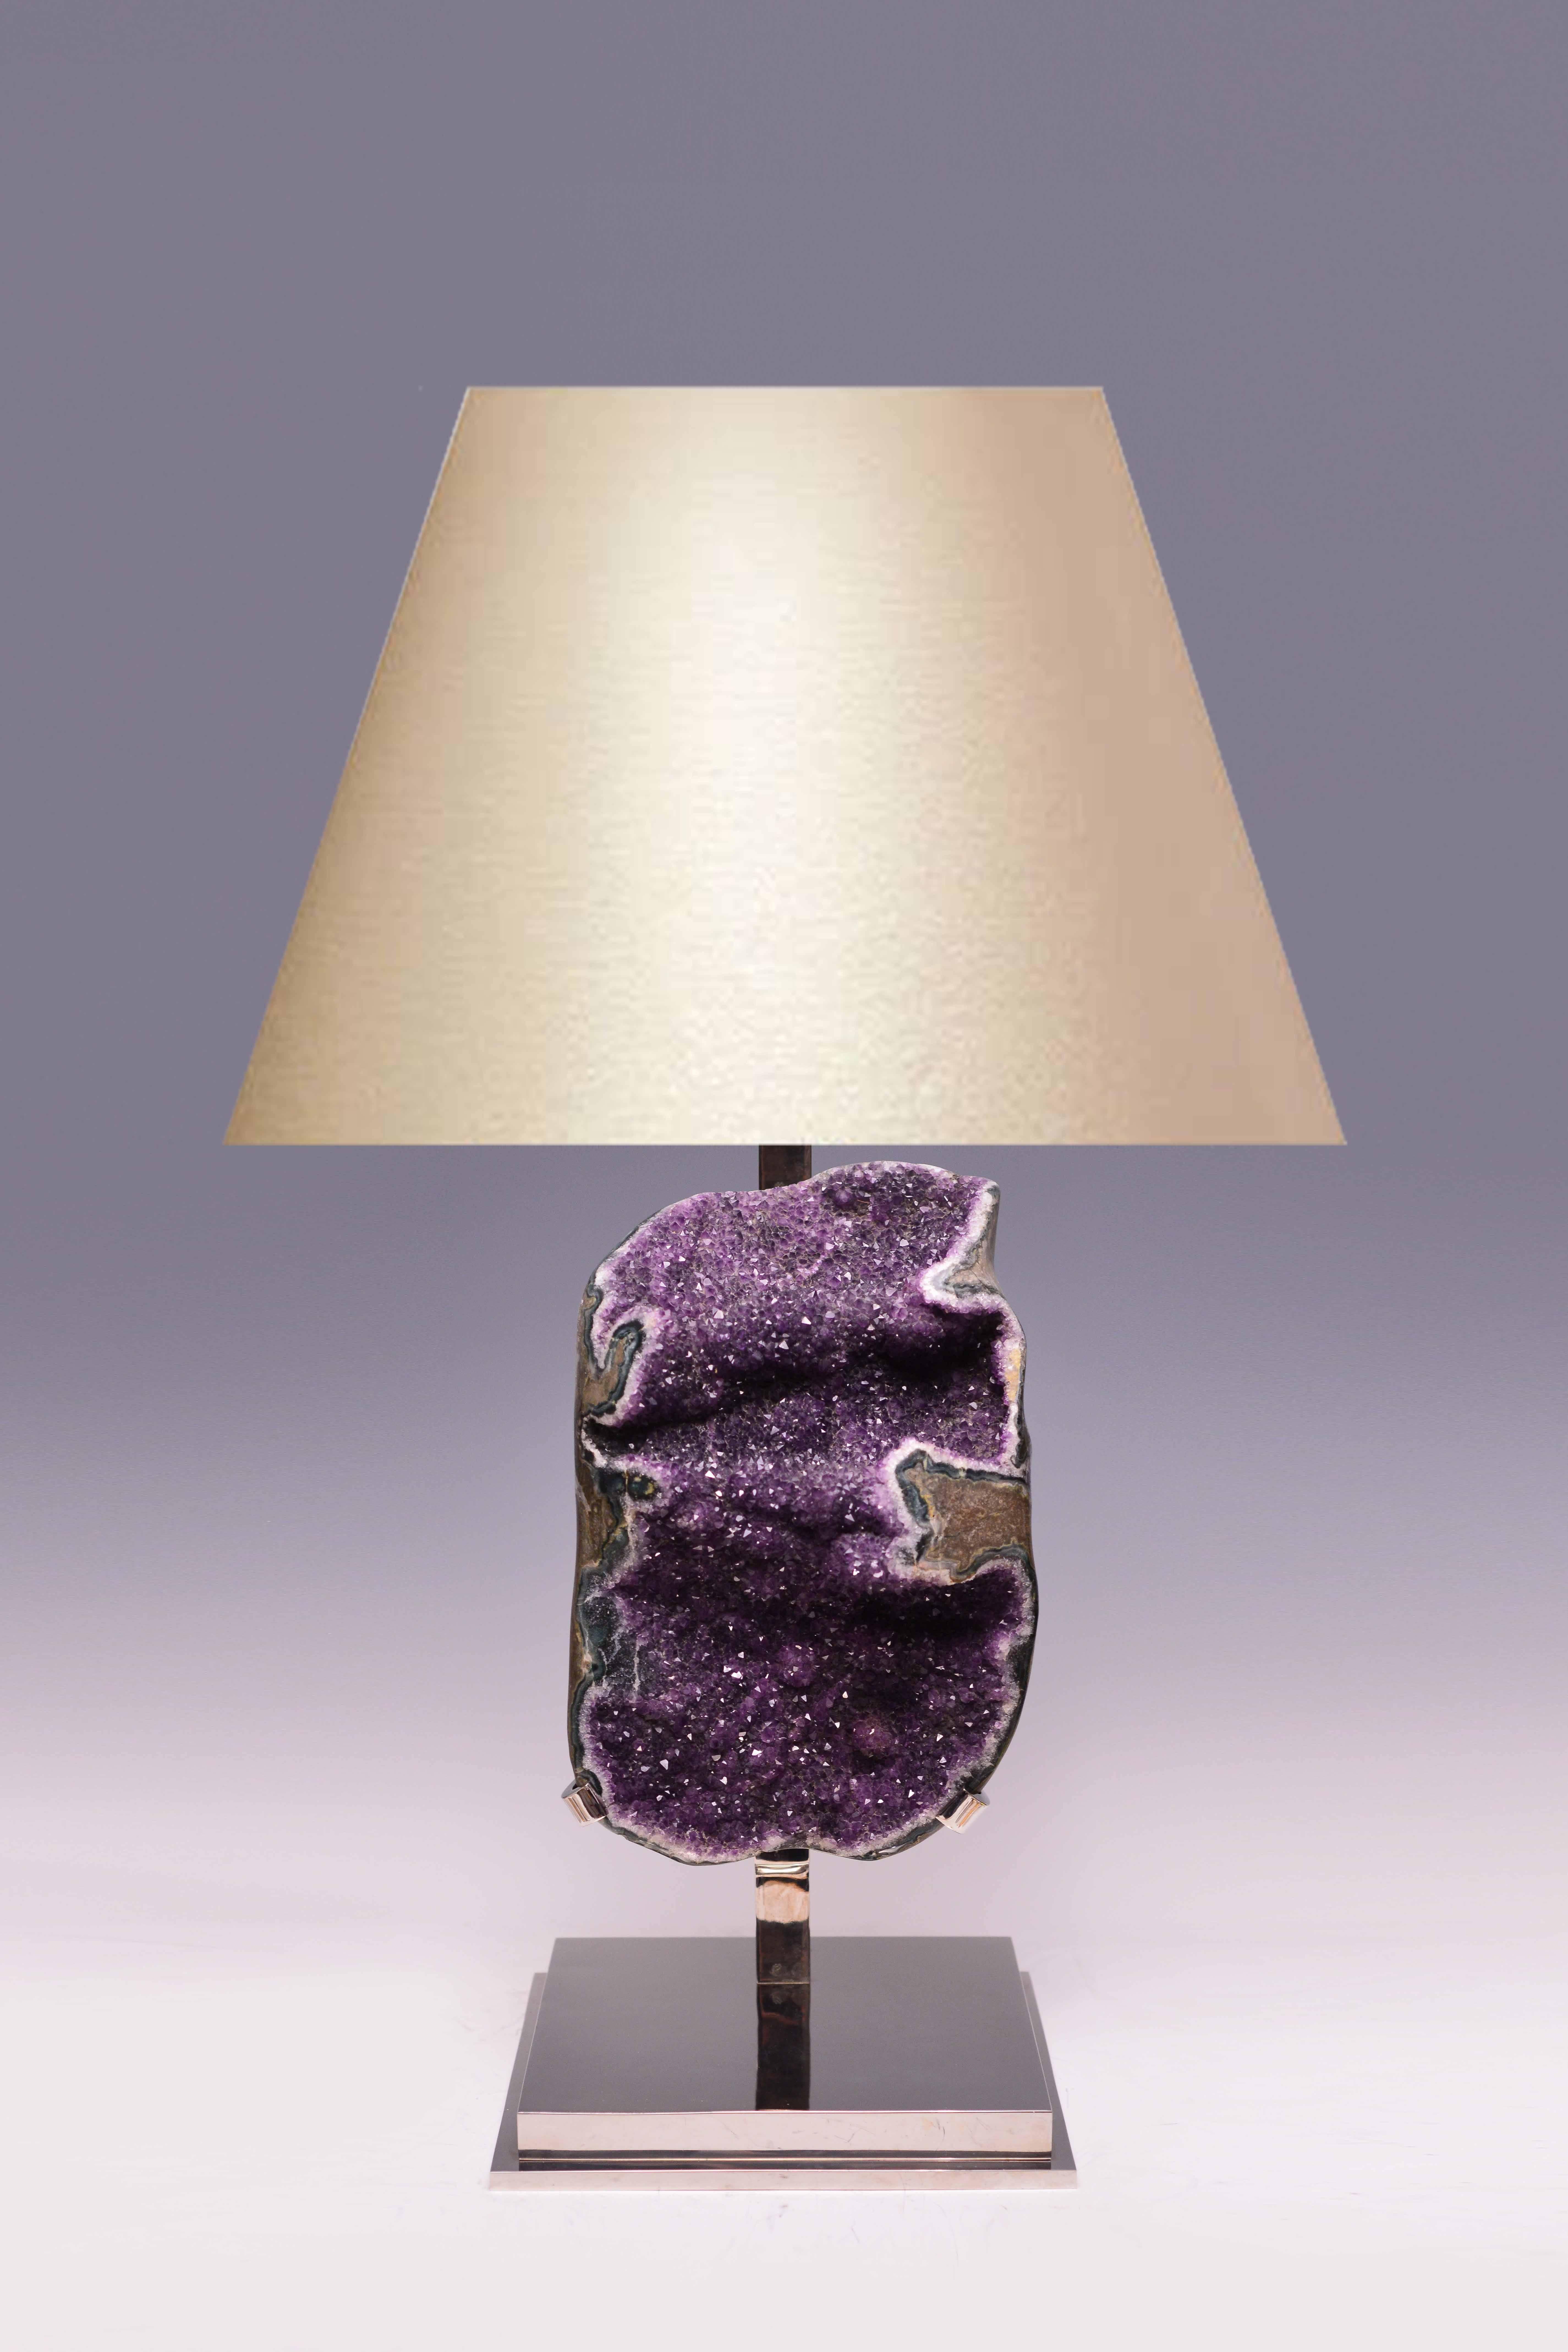 Natural amethyst rock crystal quartz, mounted as a lamp, created by Phoenix Gallery, NYC.
To the amethyst: 19.75